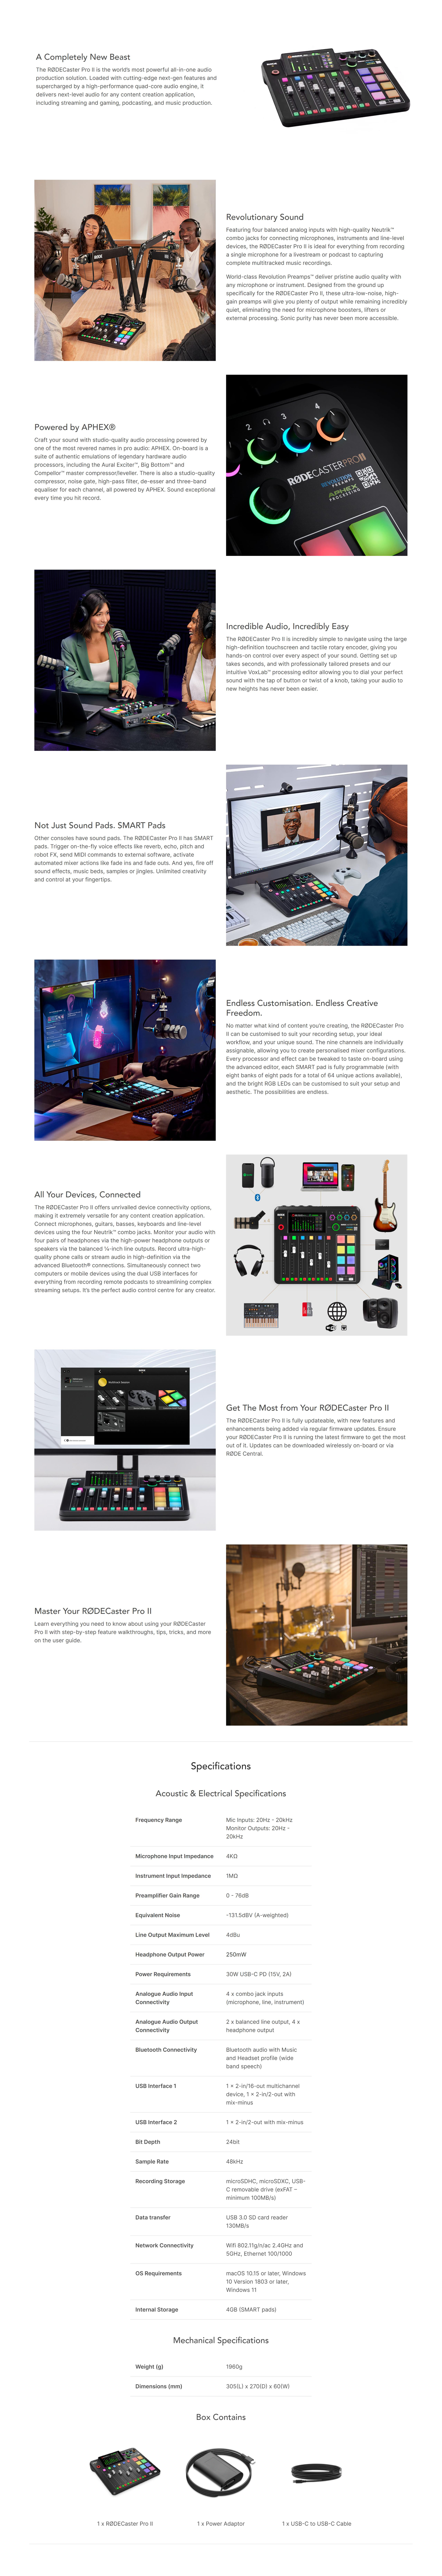 A large marketing image providing additional information about the product RODE RODECaster Pro II Integrated Audio Production Studio - Additional alt info not provided